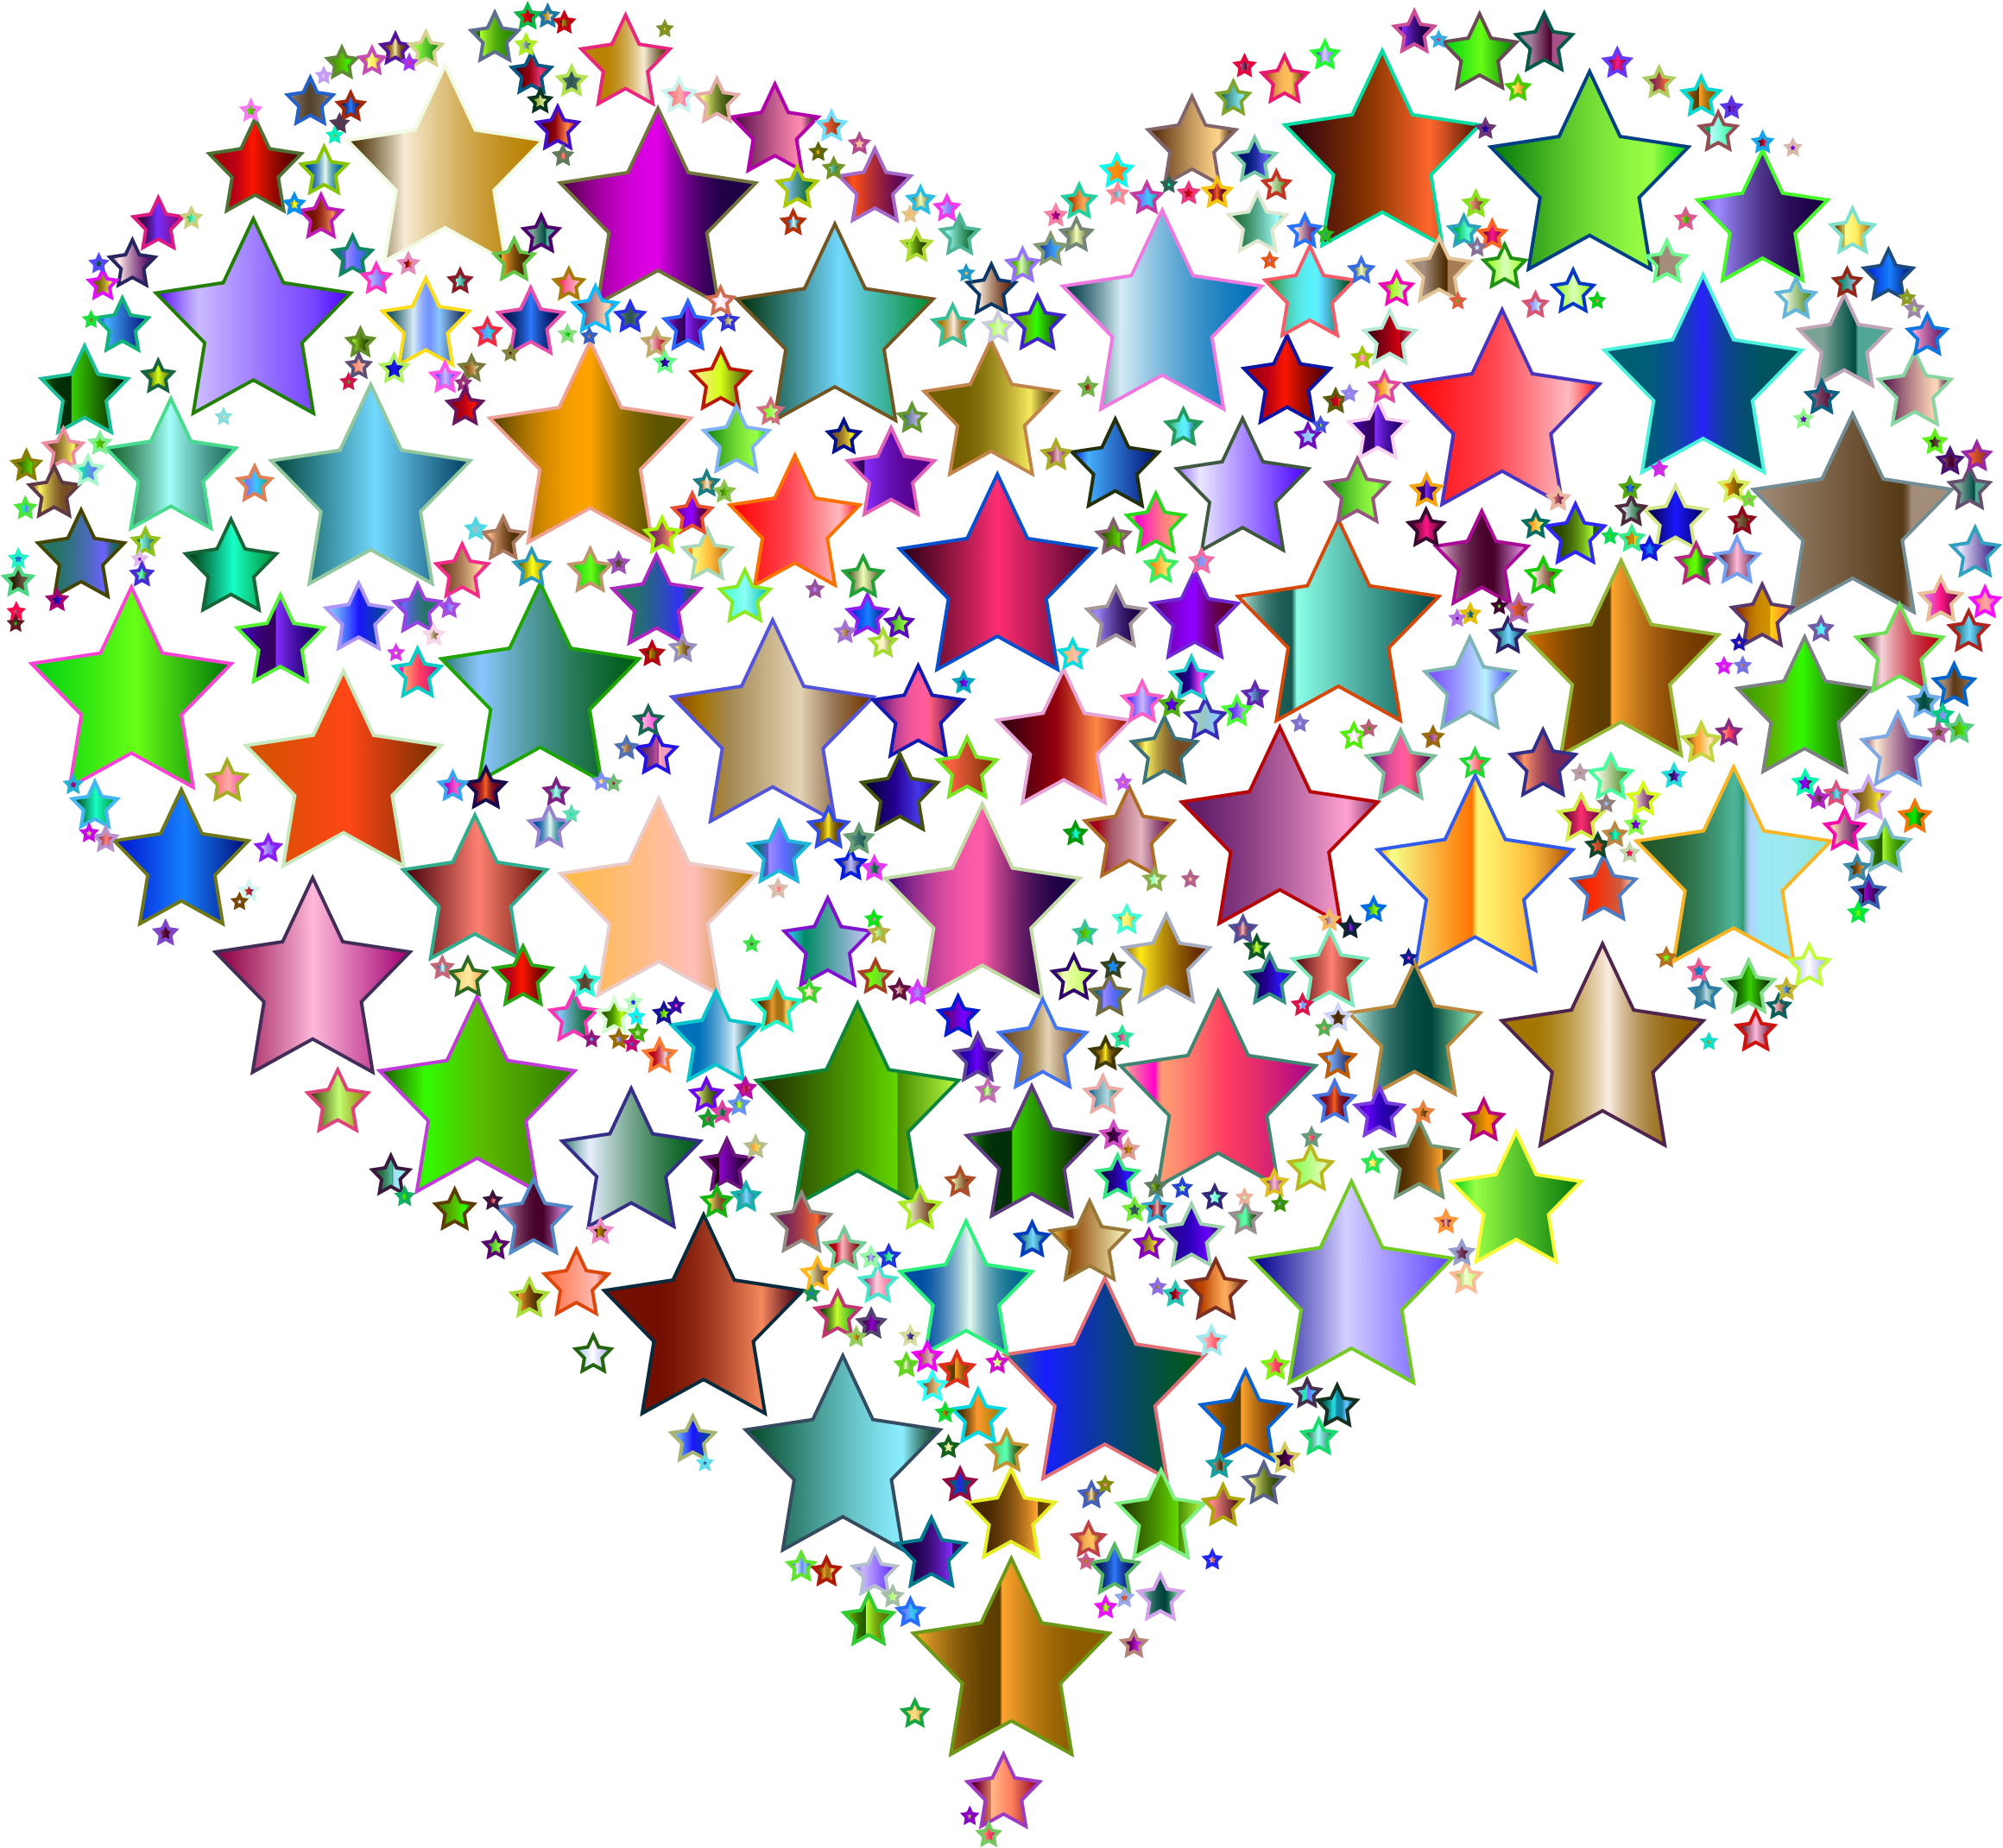 A Heart Shaped Star Made Of Different Colors